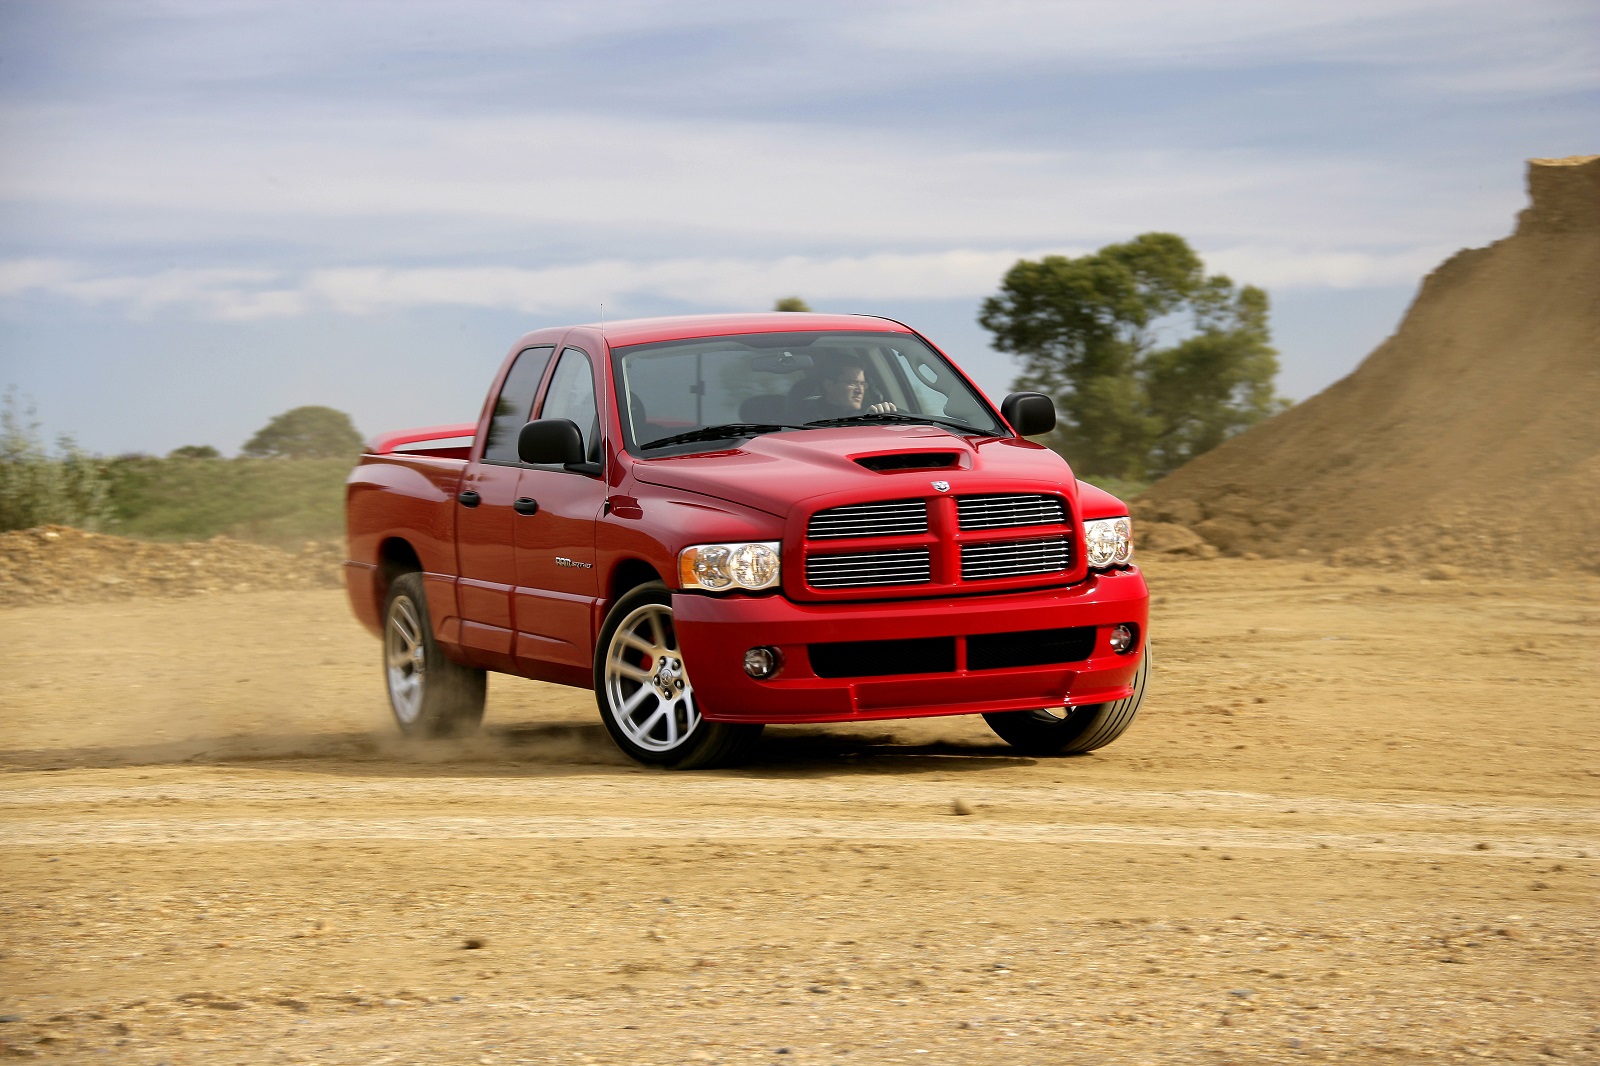 <p>Marrying a <strong>pick-up truck</strong> and the 8.3-liter V10 motor from a sports car might sound like a <strong>shotgun</strong> wedding, but nobody seemed to mind at Dodge. At a stroke, it created the Ram SRT-10 complete with engine from the Viper. Fittingly for a pick-up, the engine was remarkably simple with only two valves per cylinder and naturally aspirated, so no turbos here.</p><p>When it arrived in 2004, the Ram SRT-10 caused a storm as it had over <strong>500 hp</strong> on tap and could <strong>154mph</strong> flat out. Use the engine’s full potential and it could also cover 0-60mph in <strong>4.9 seconds</strong> if you stuck with the lighter regular cab model. This shorter cab version came with a <strong>six-speed manual</strong> as standard, but the five-seat Quad Cab model had a four-speed auto transmission as its only option.</p>